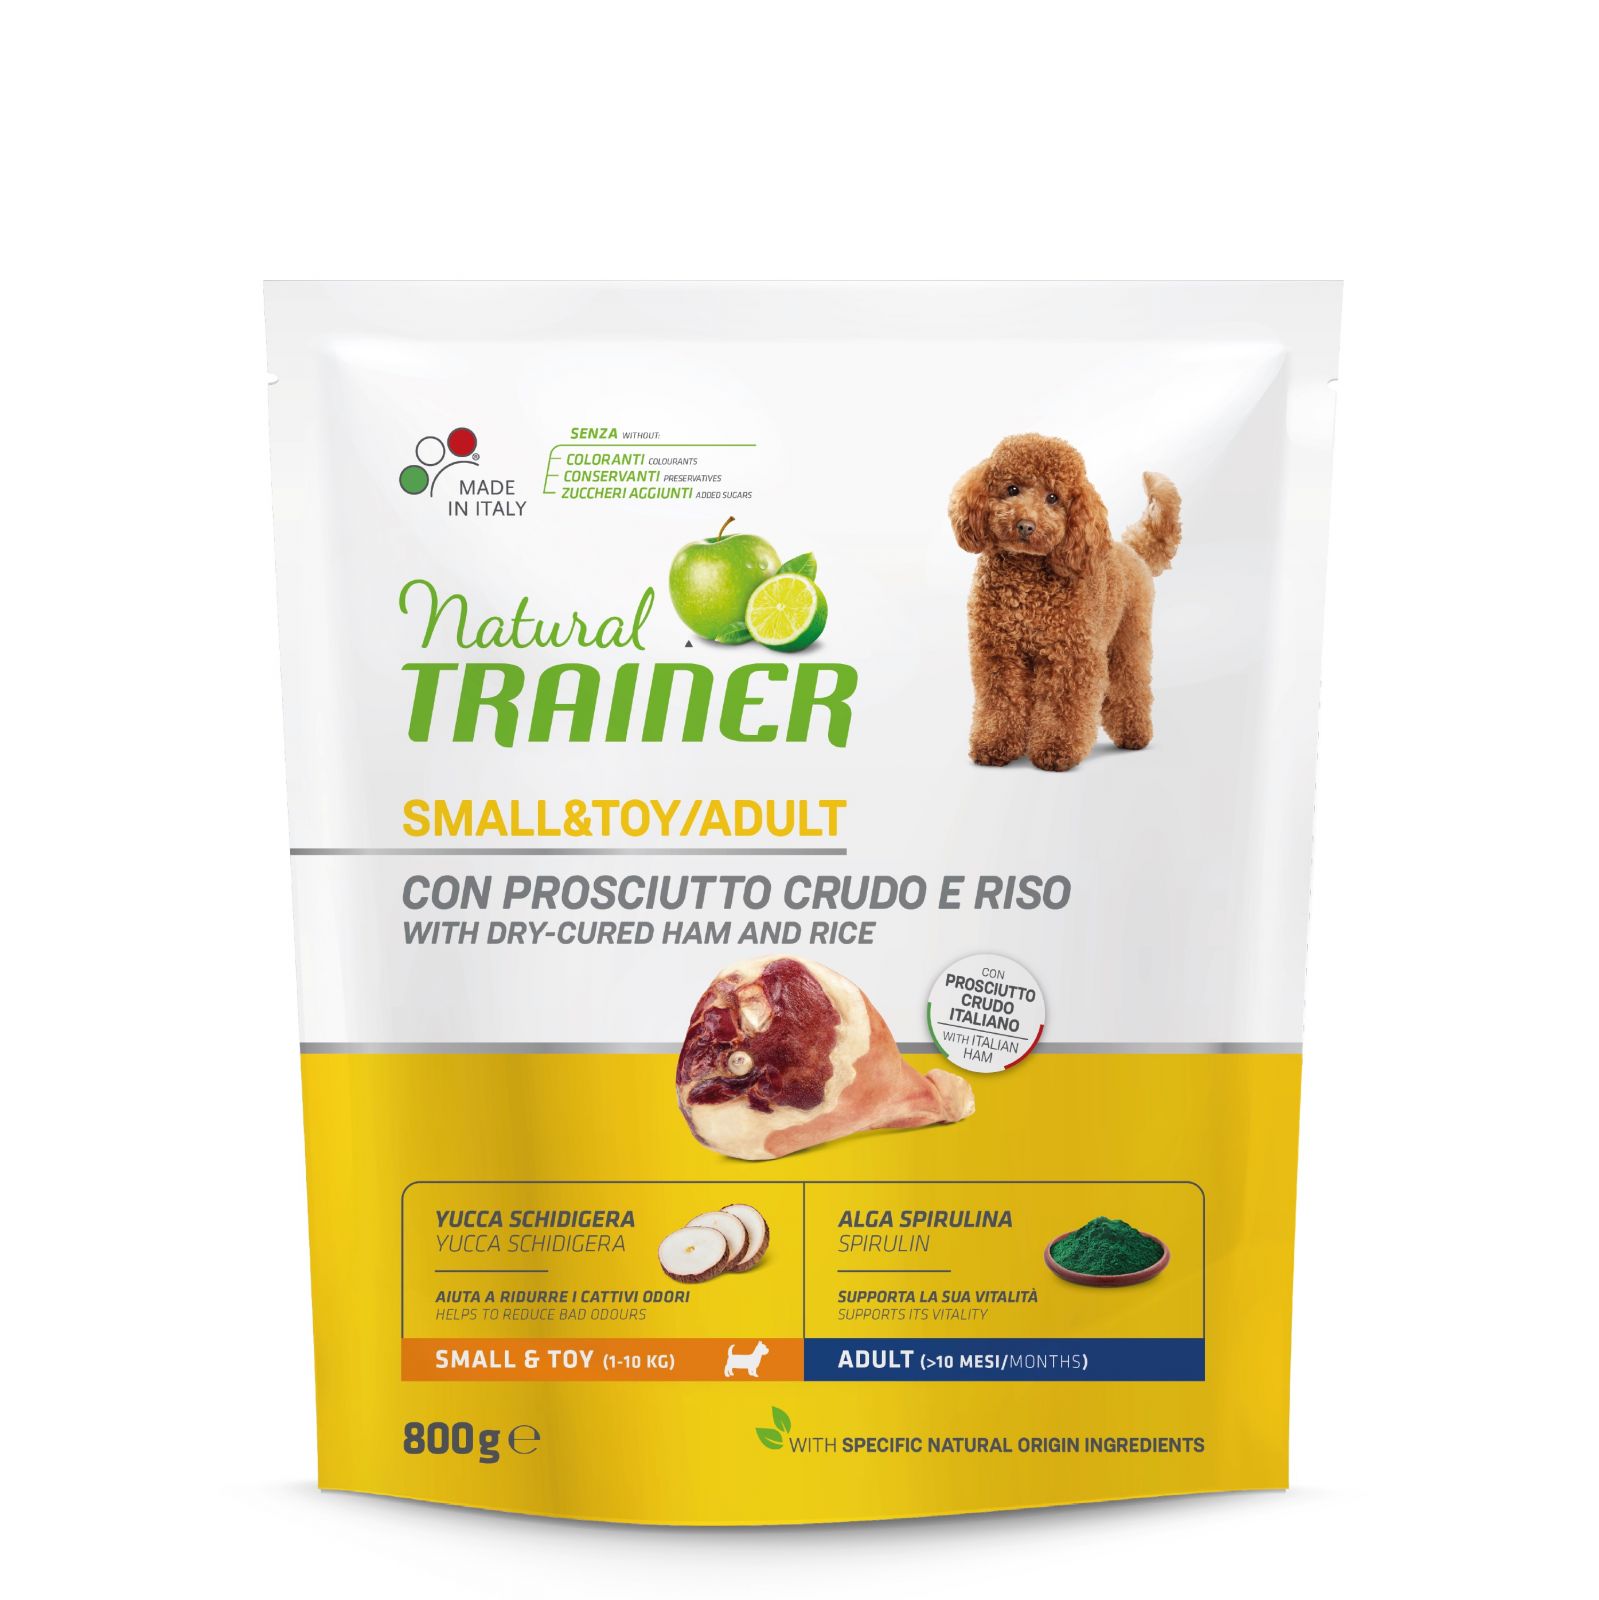 TRAINER Natural Small&Toy Adult Prosciutto a ryze 800g Natural Trainer